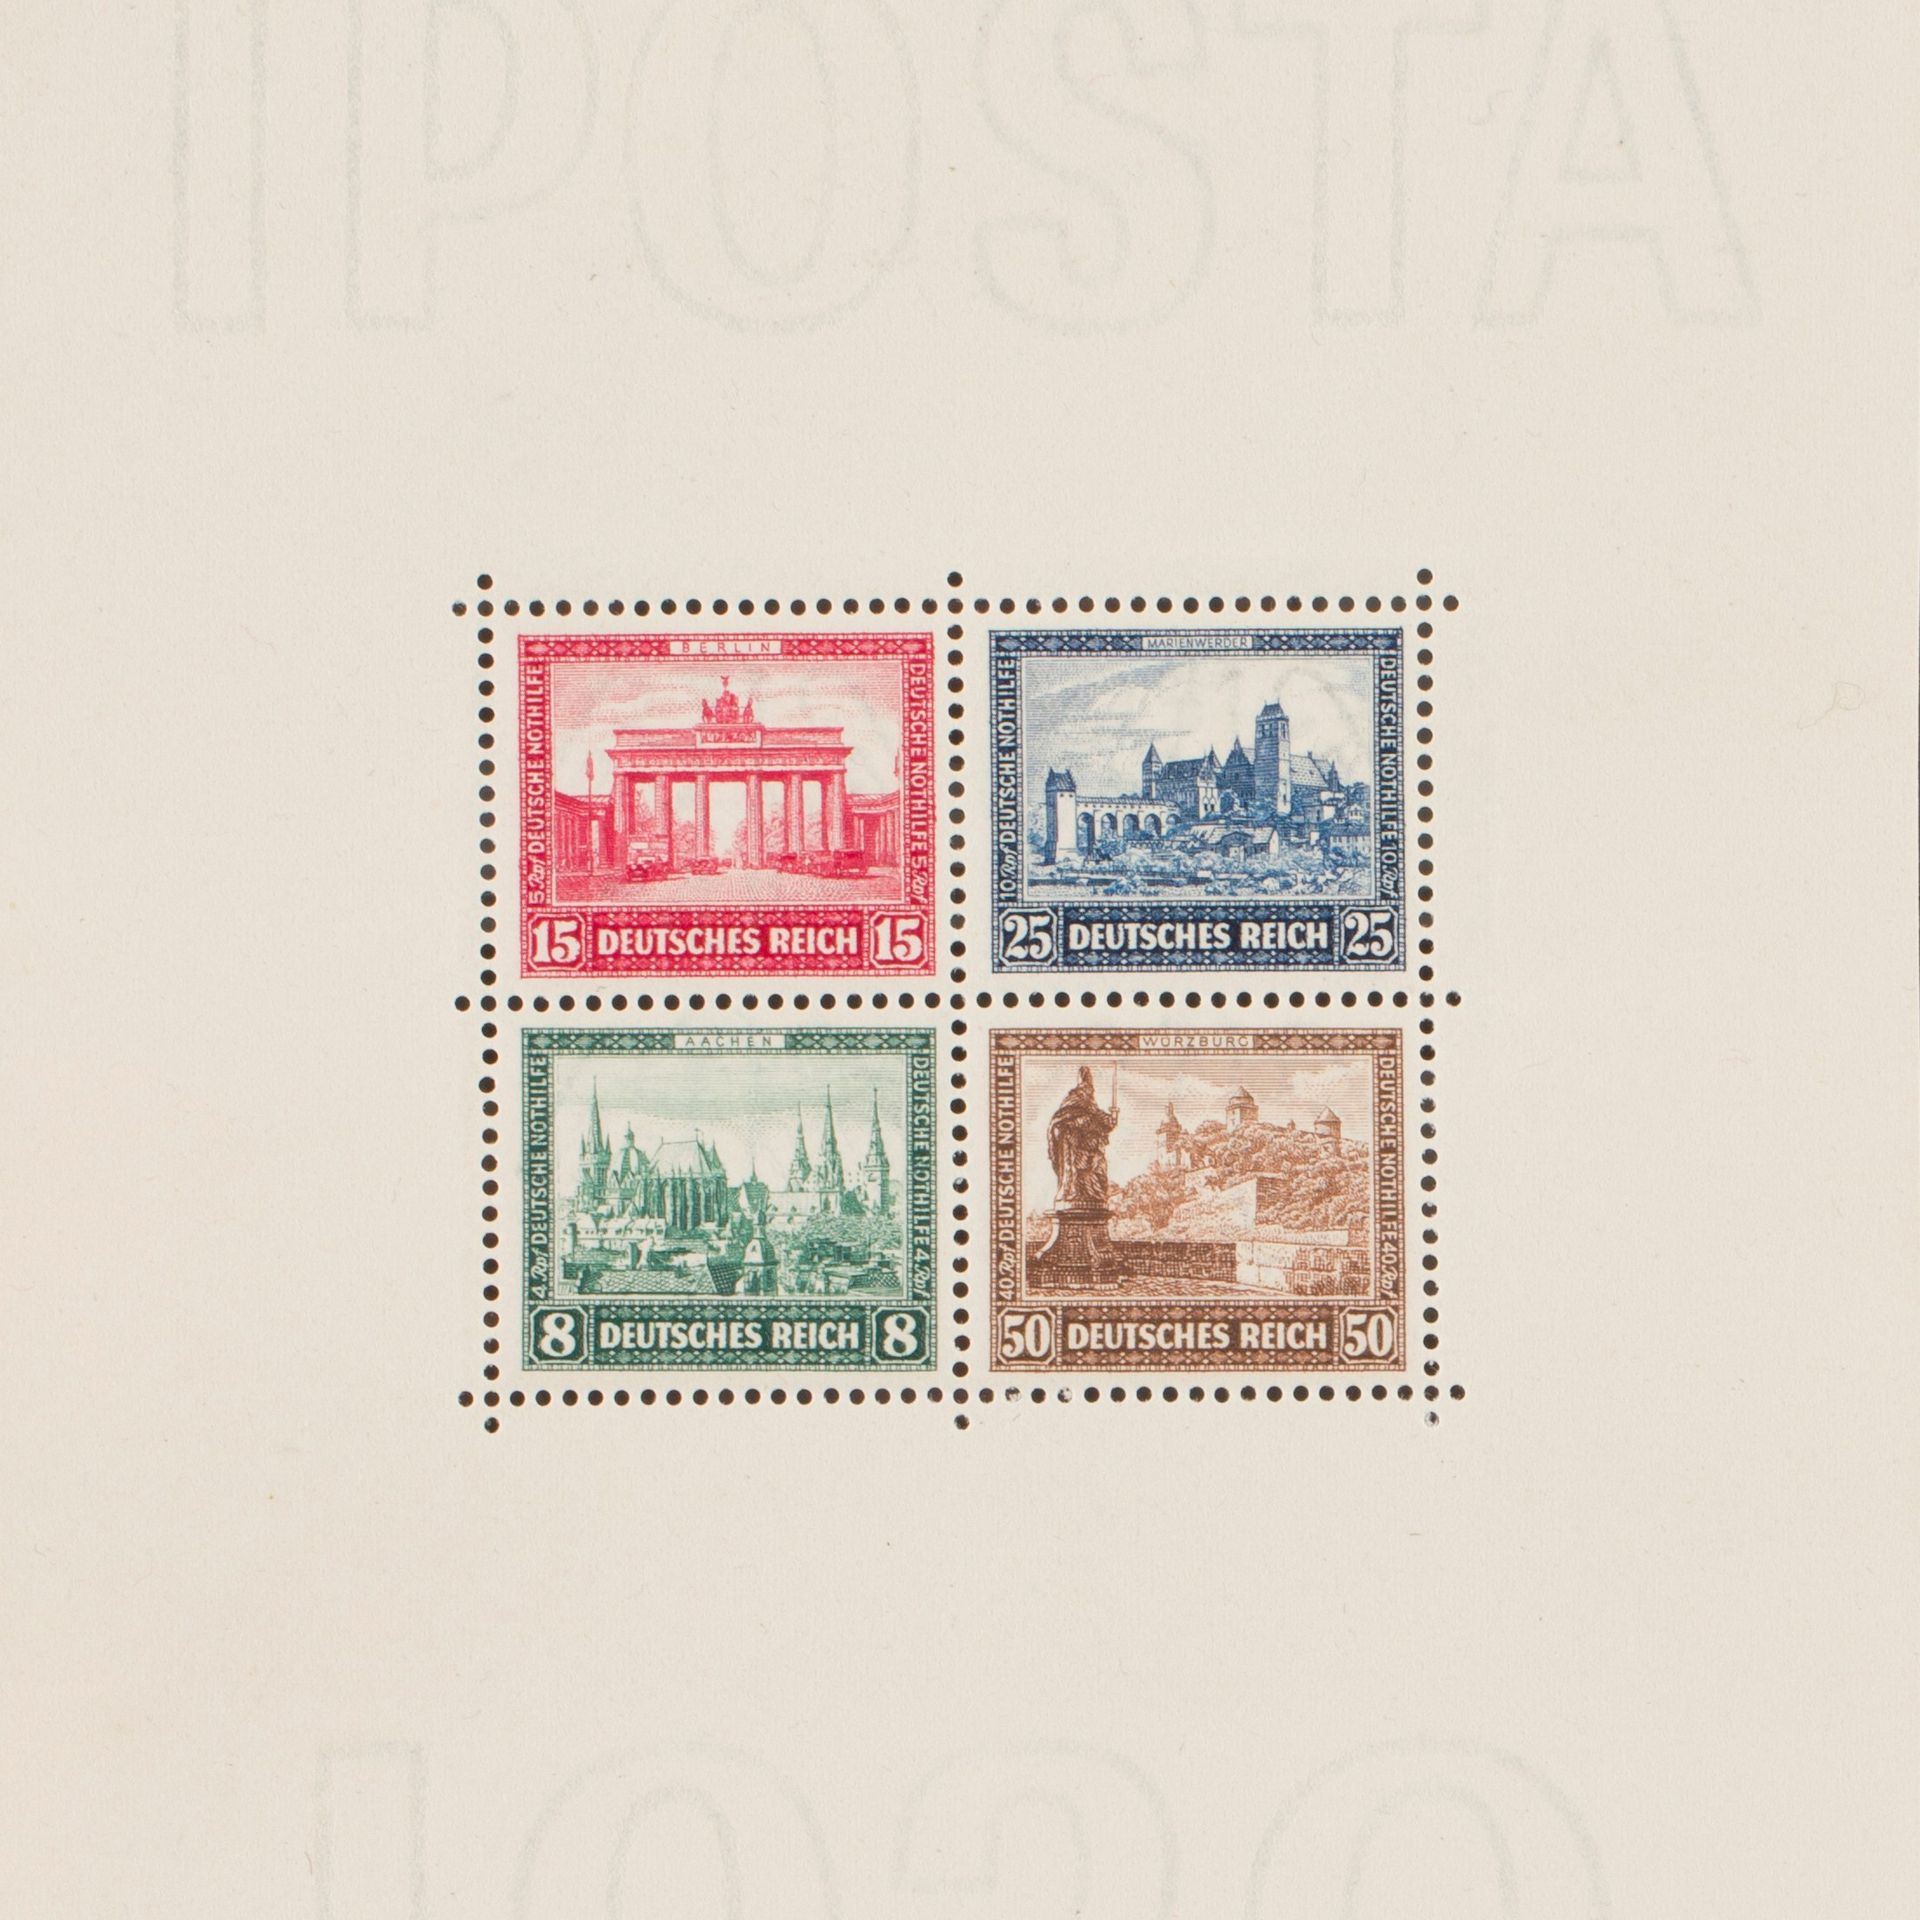 Null [ALLEMAGNE]
Superbe Bloc n°1 d'Allemagne "IPOSTA 1930" neuf ** luxe.